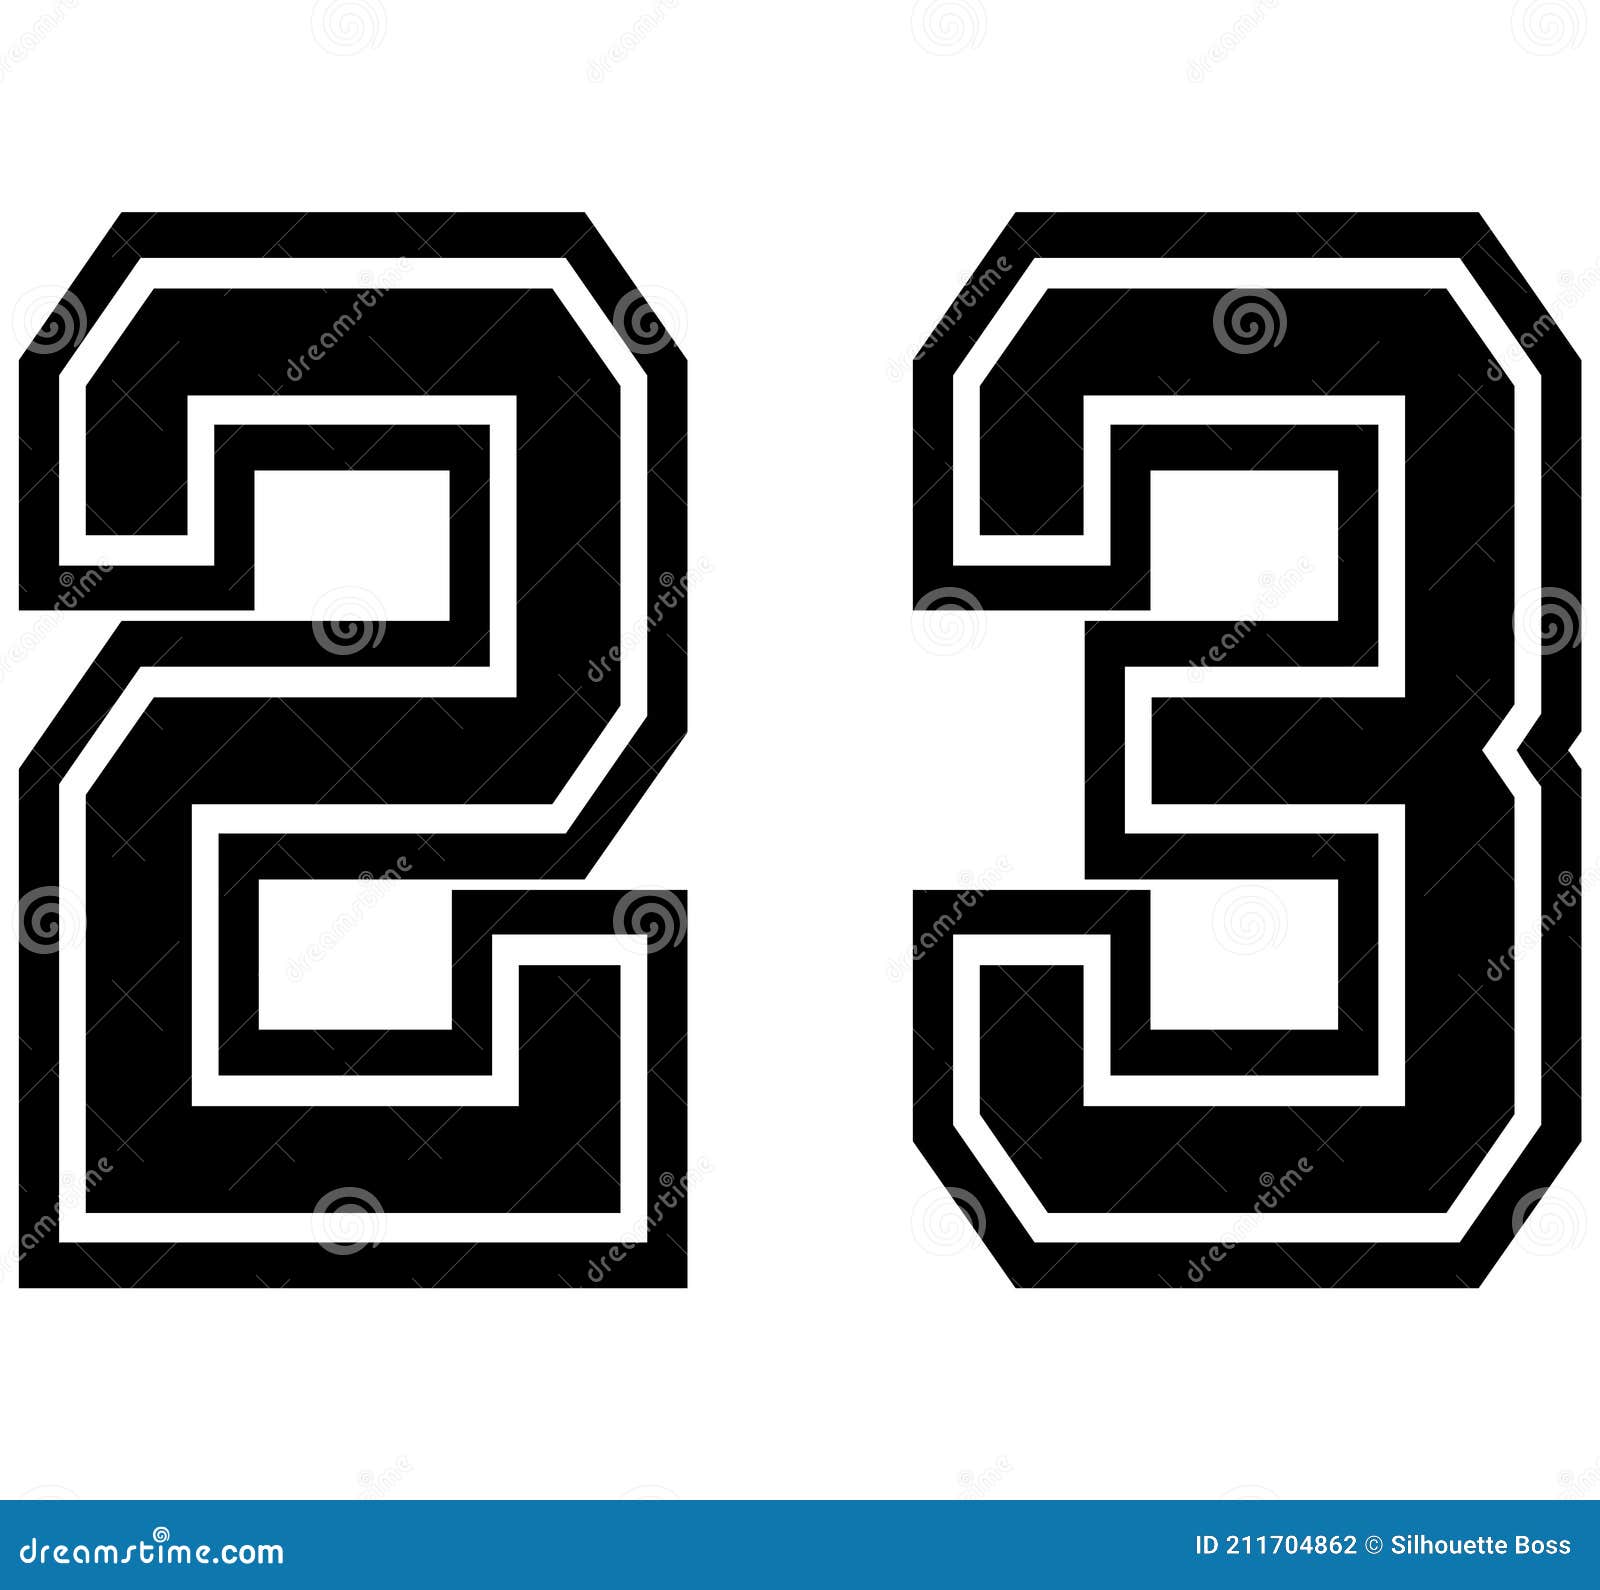 23 American Football Classic Vintage Sport Jersey Number in black number on  white background for american football, baseball or basketball | Poster